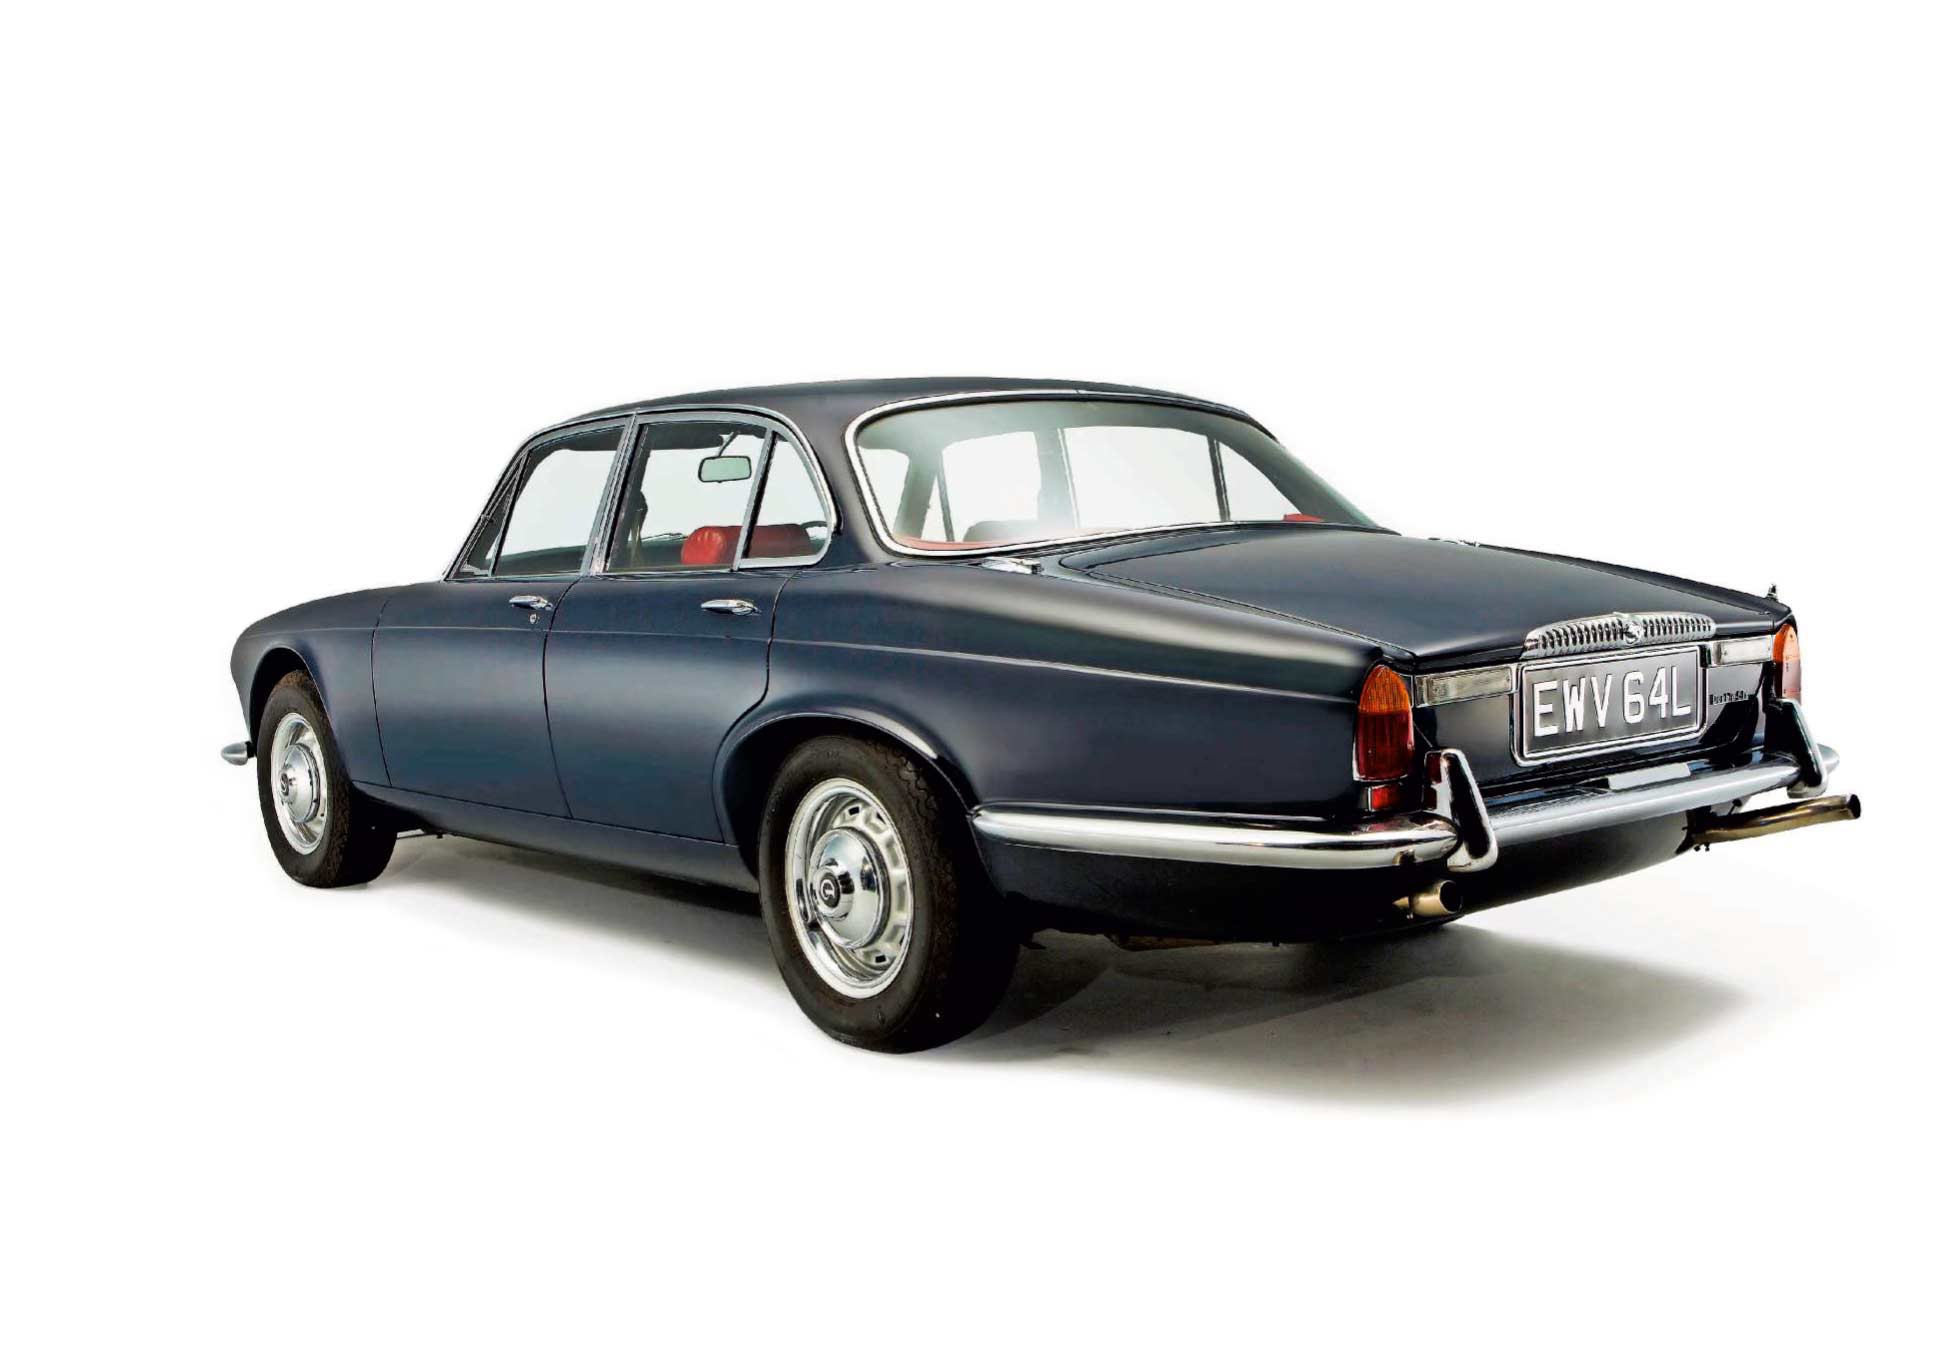 Buying Guide How To Find The Best Jaguar Xj Series 1 Or Daimler Double Six Drive My Blogs Drive